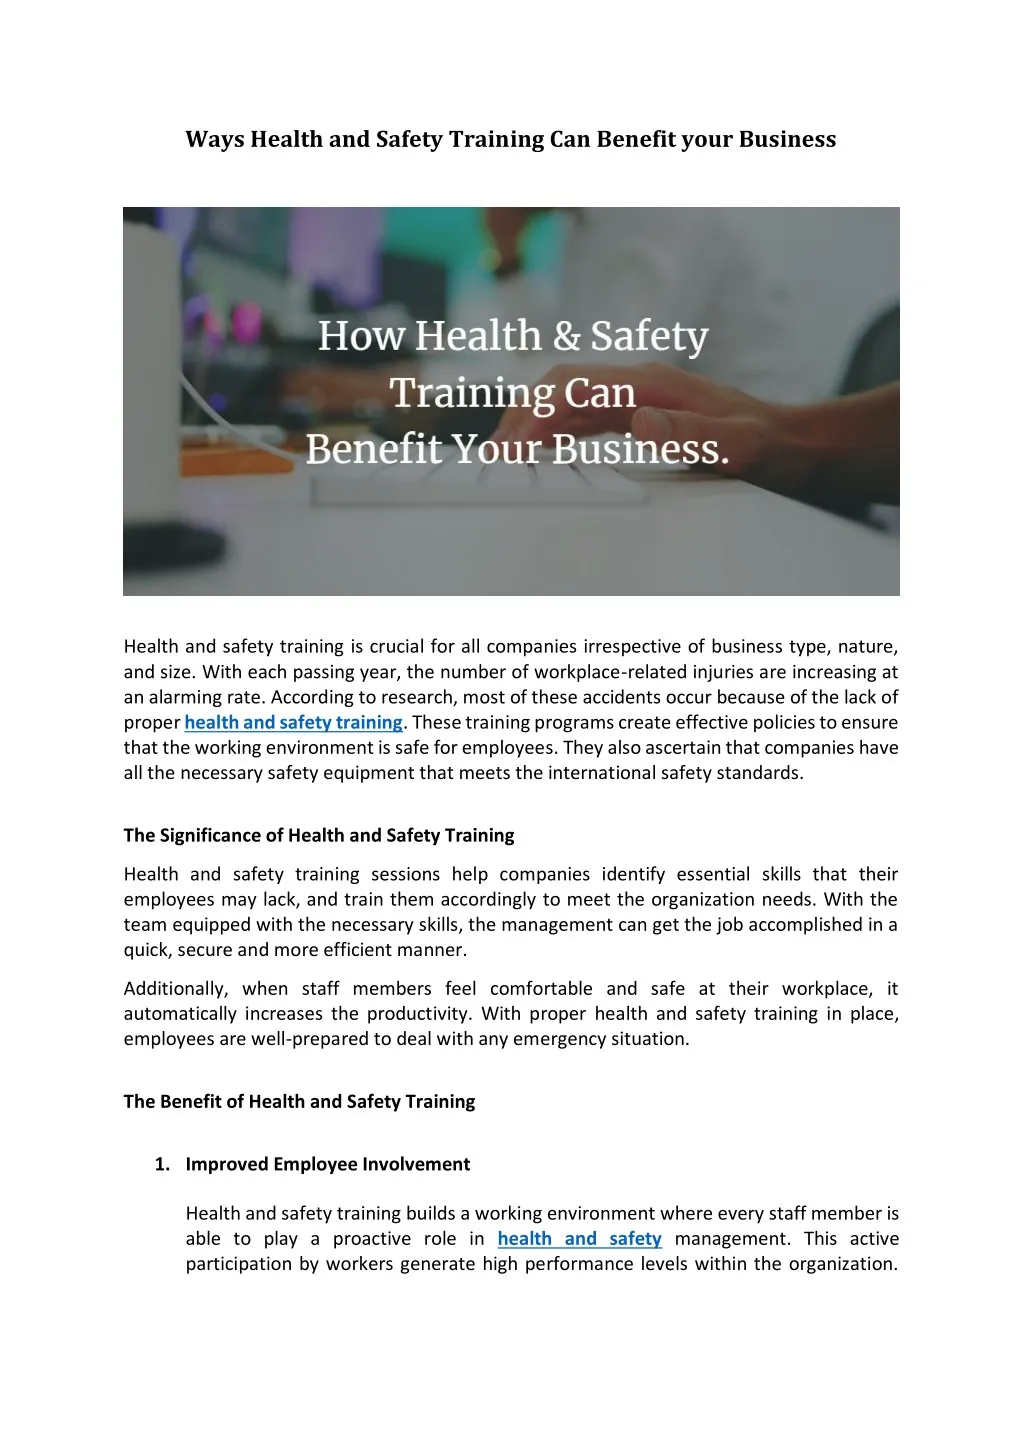 ways health and safety training can benefit your